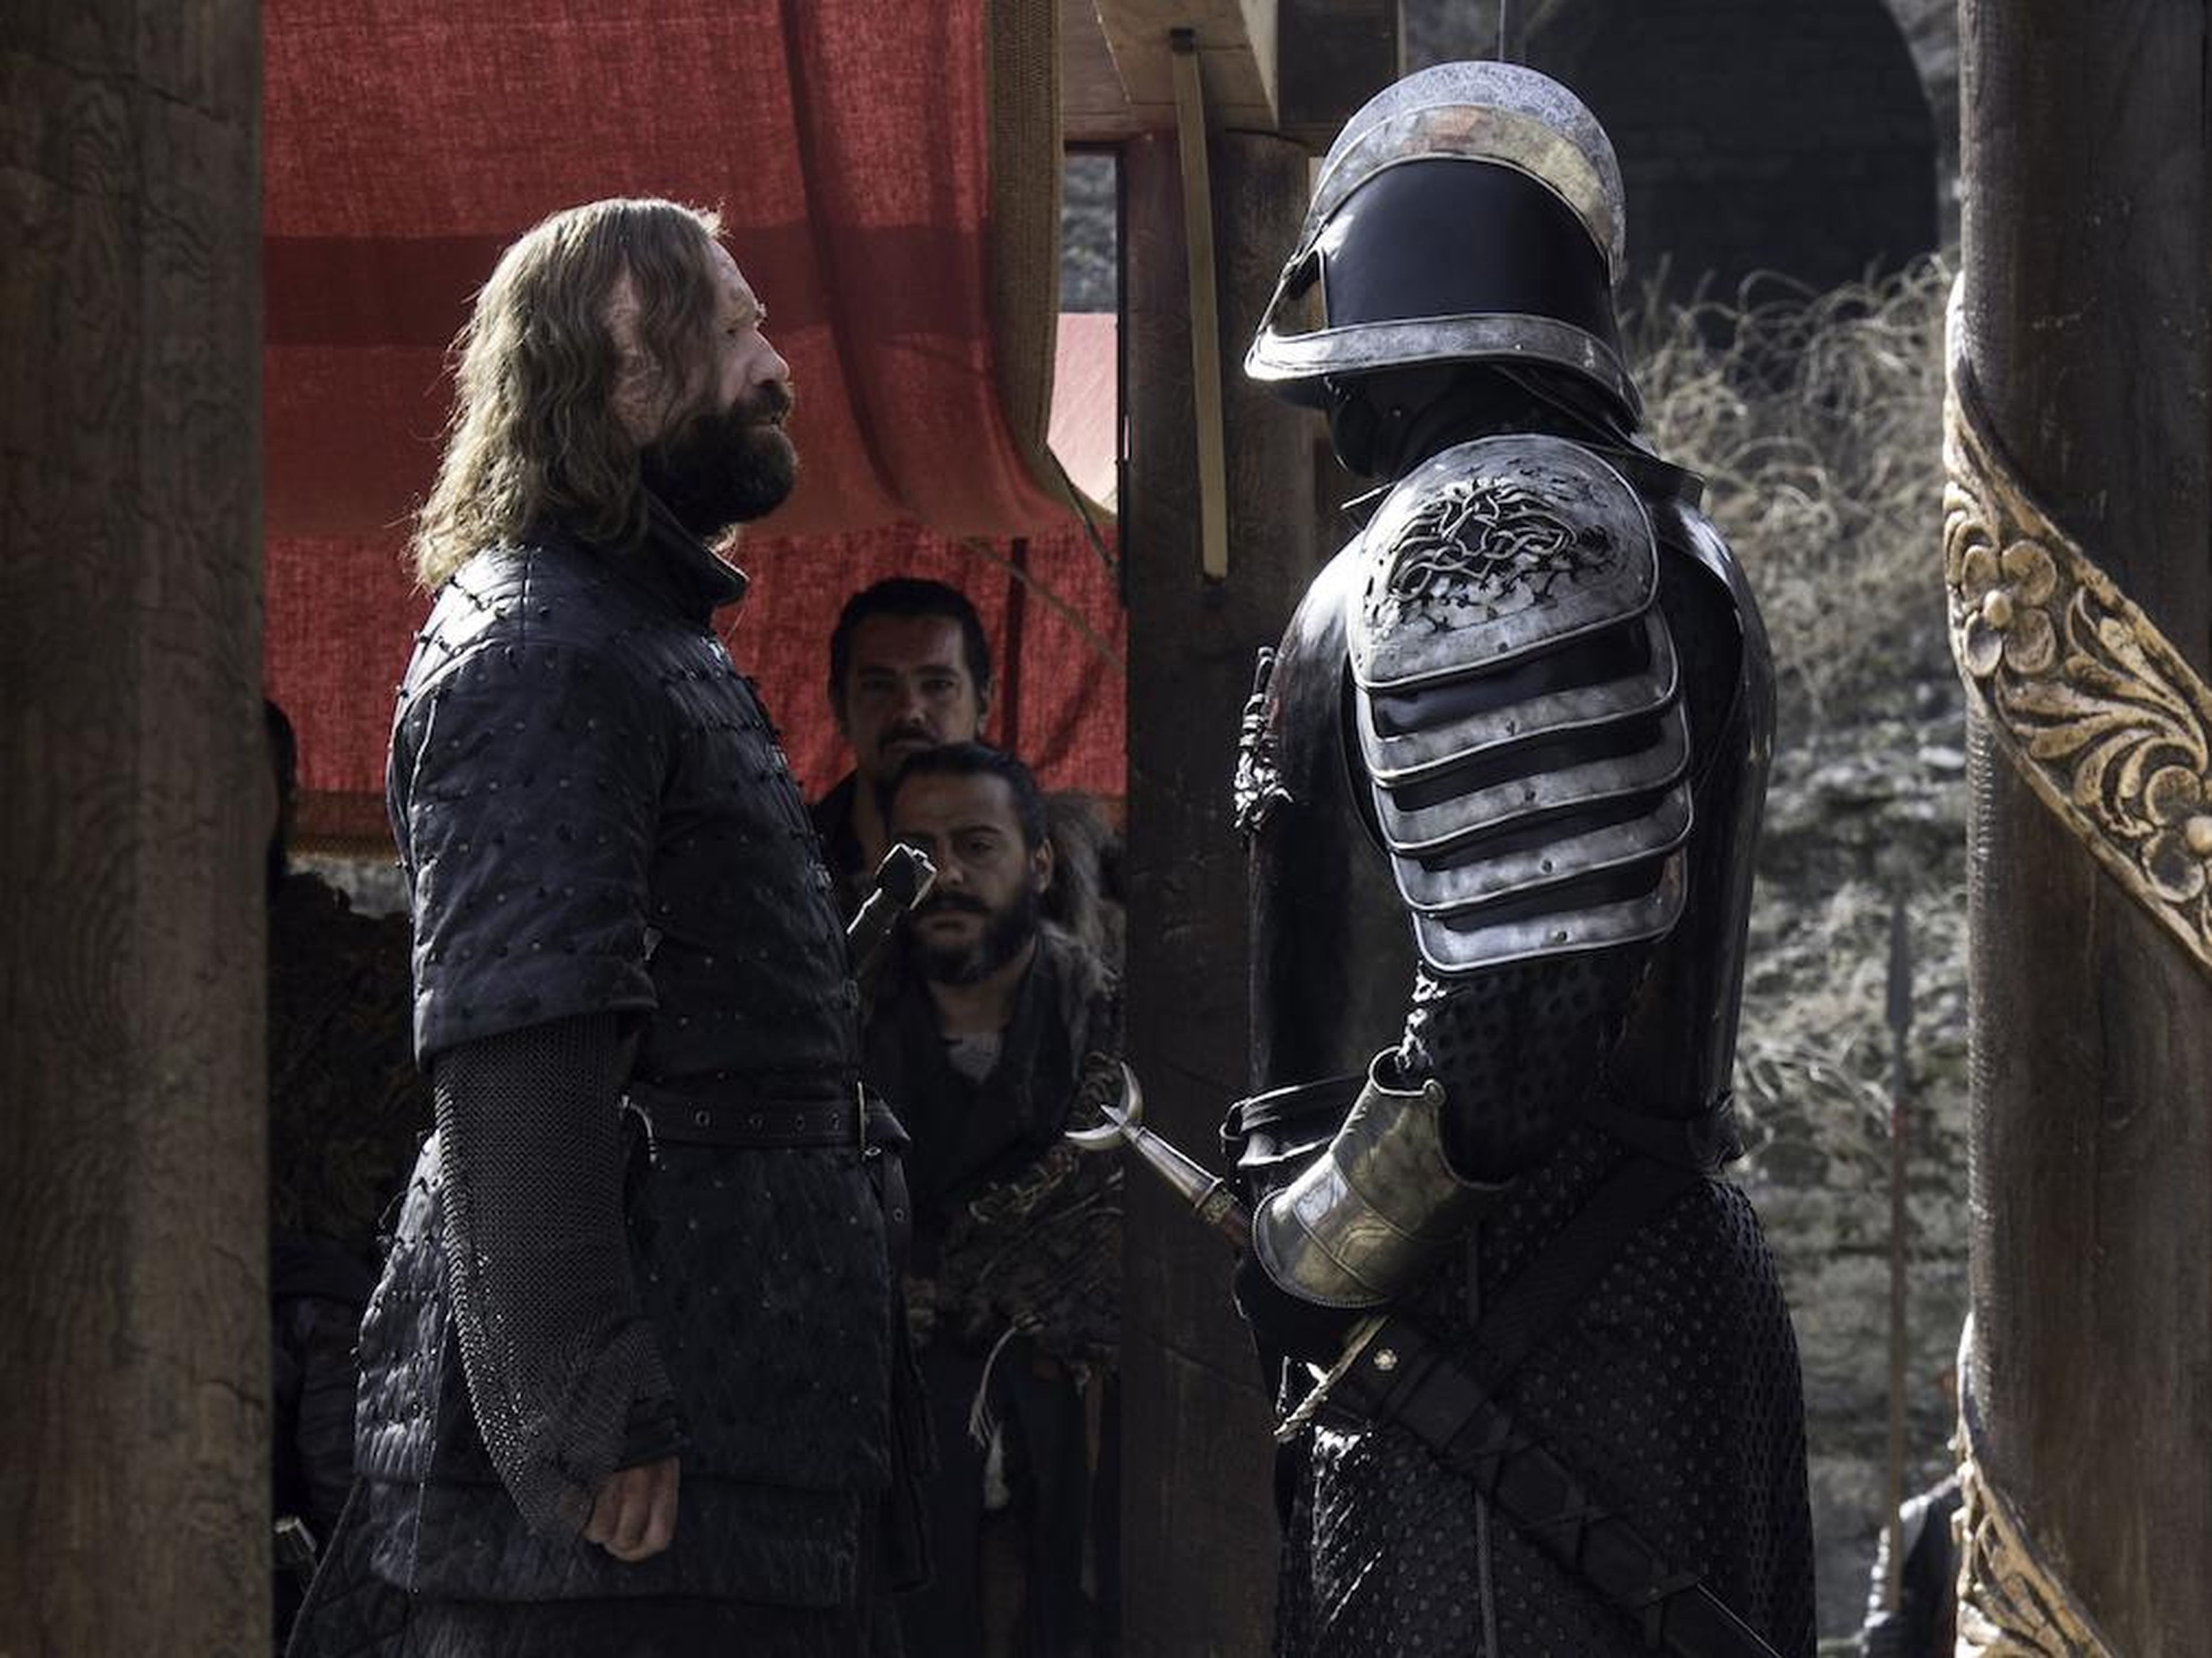 Last but not least, is Cleganebowl happening now?